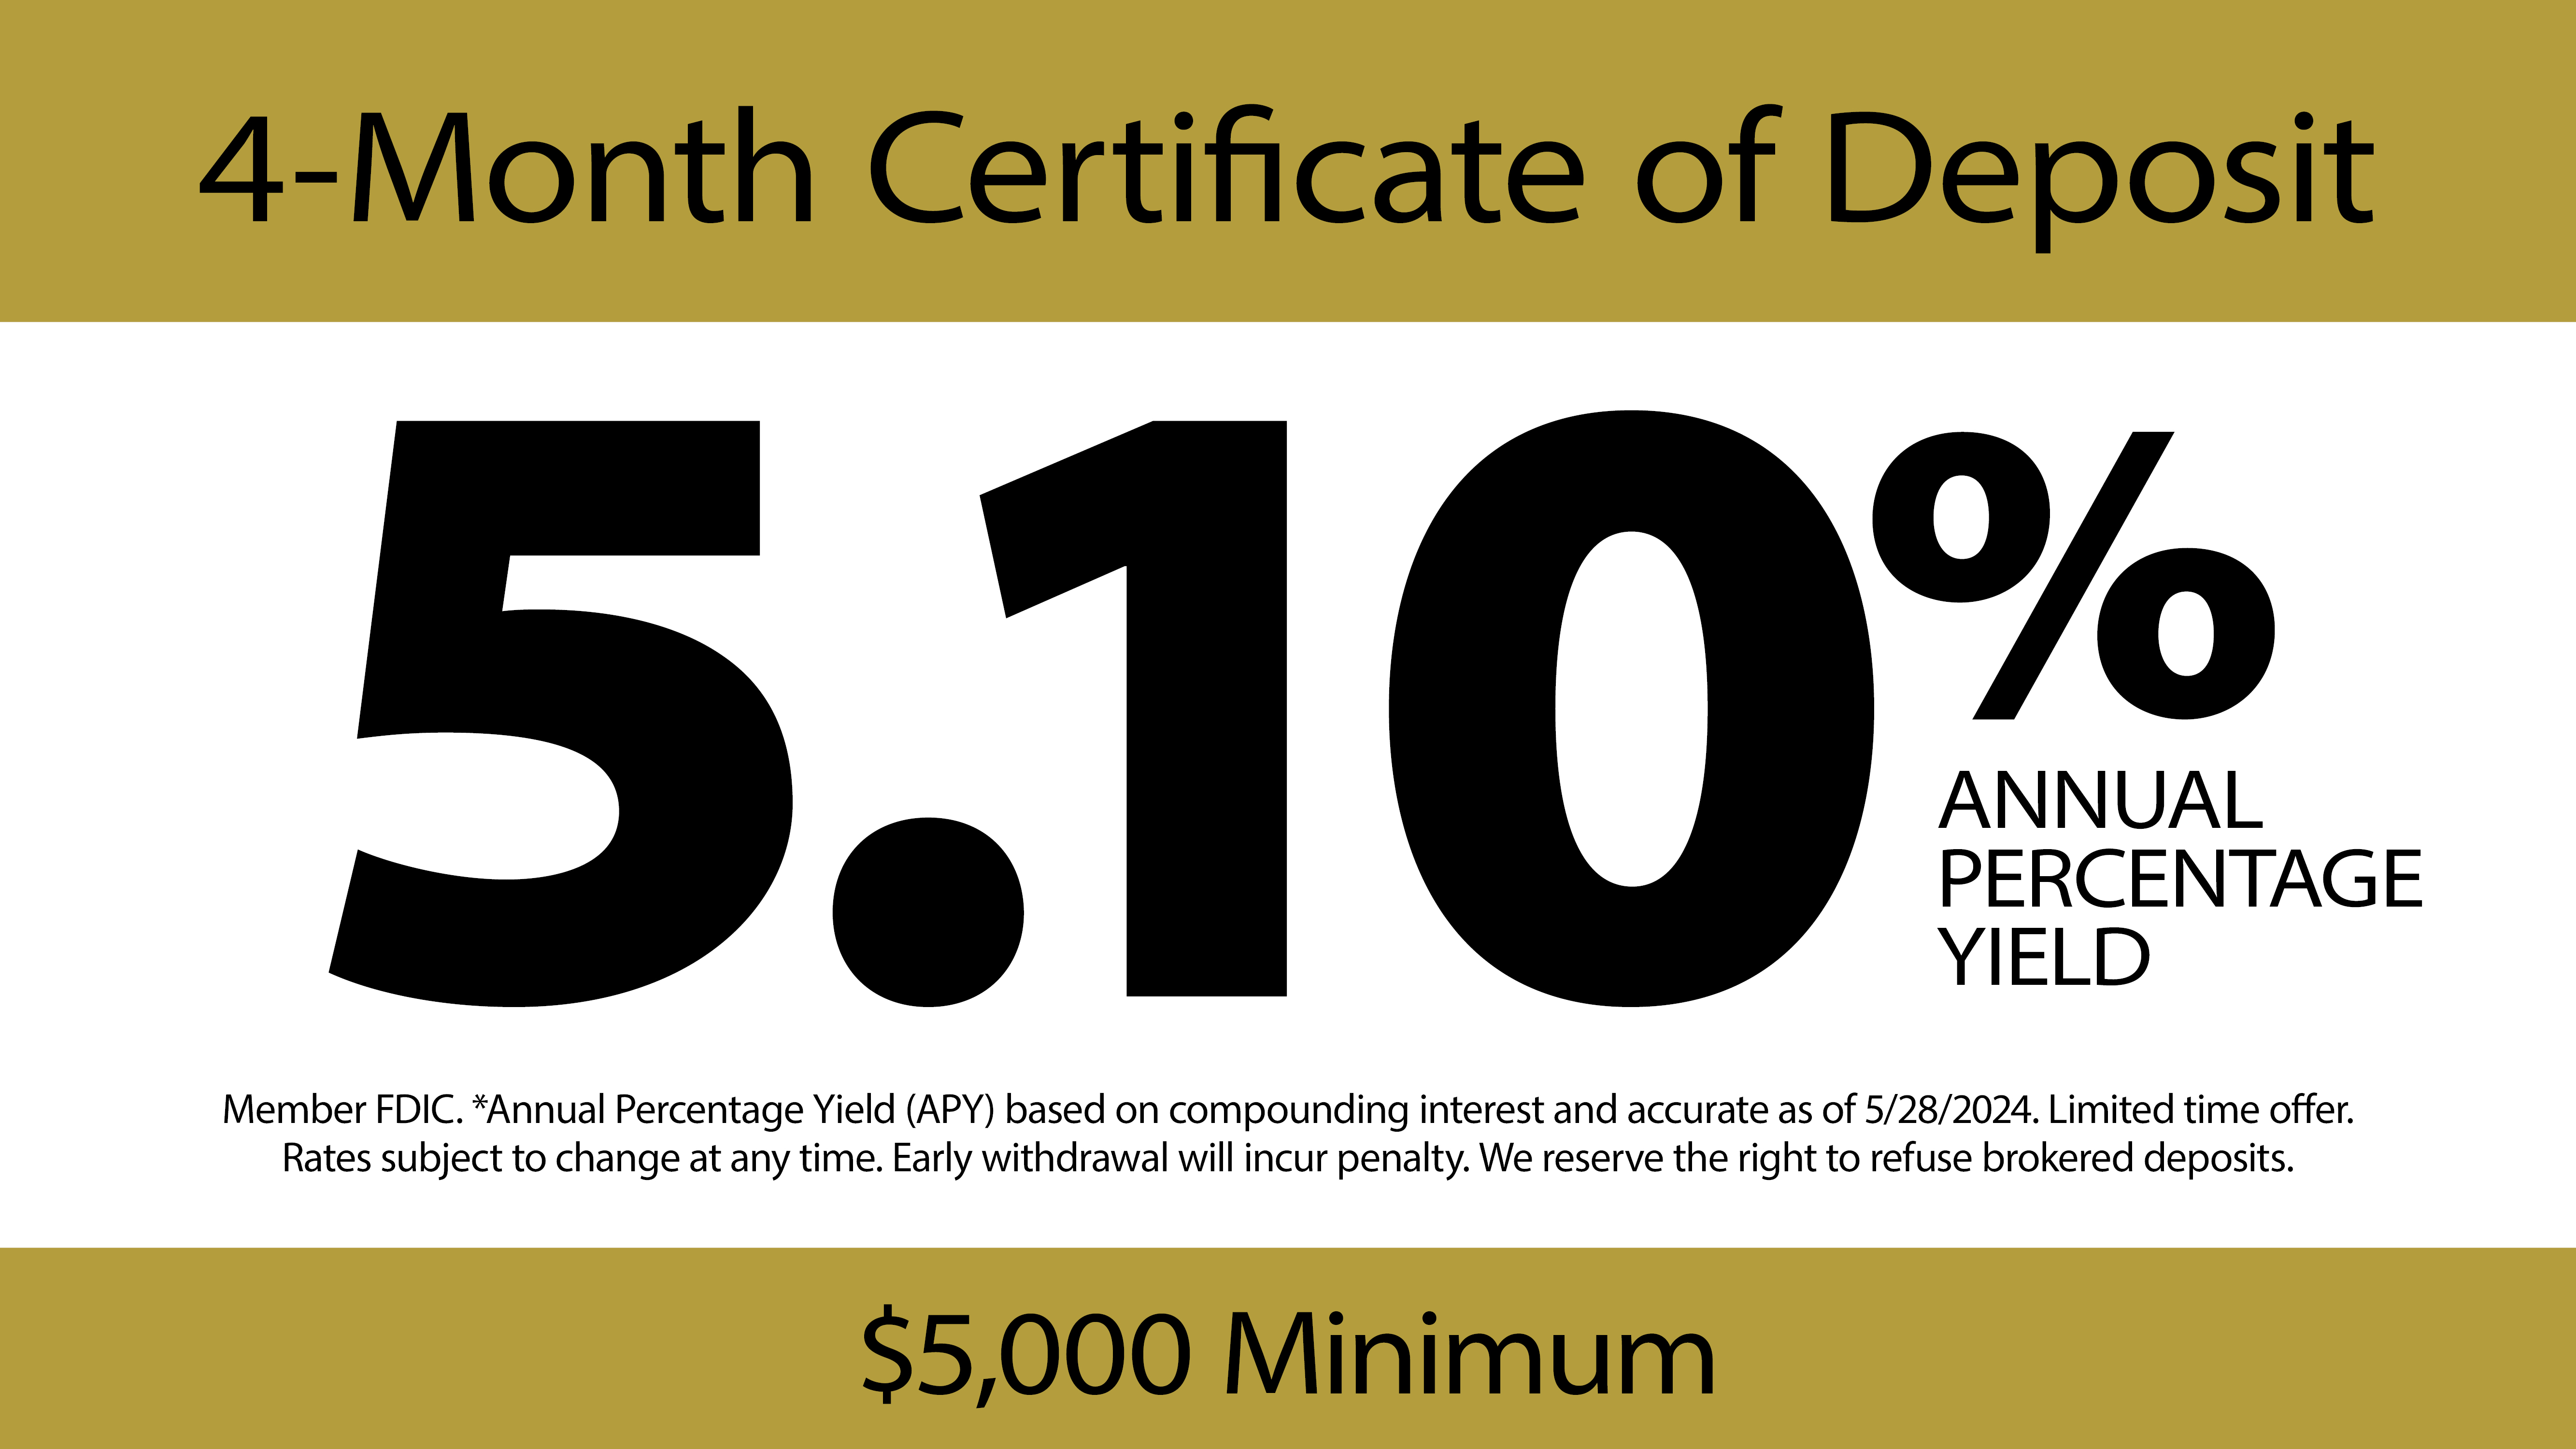 A 4-Month CD special with 5.10% APY and $5,000 minimum deposit